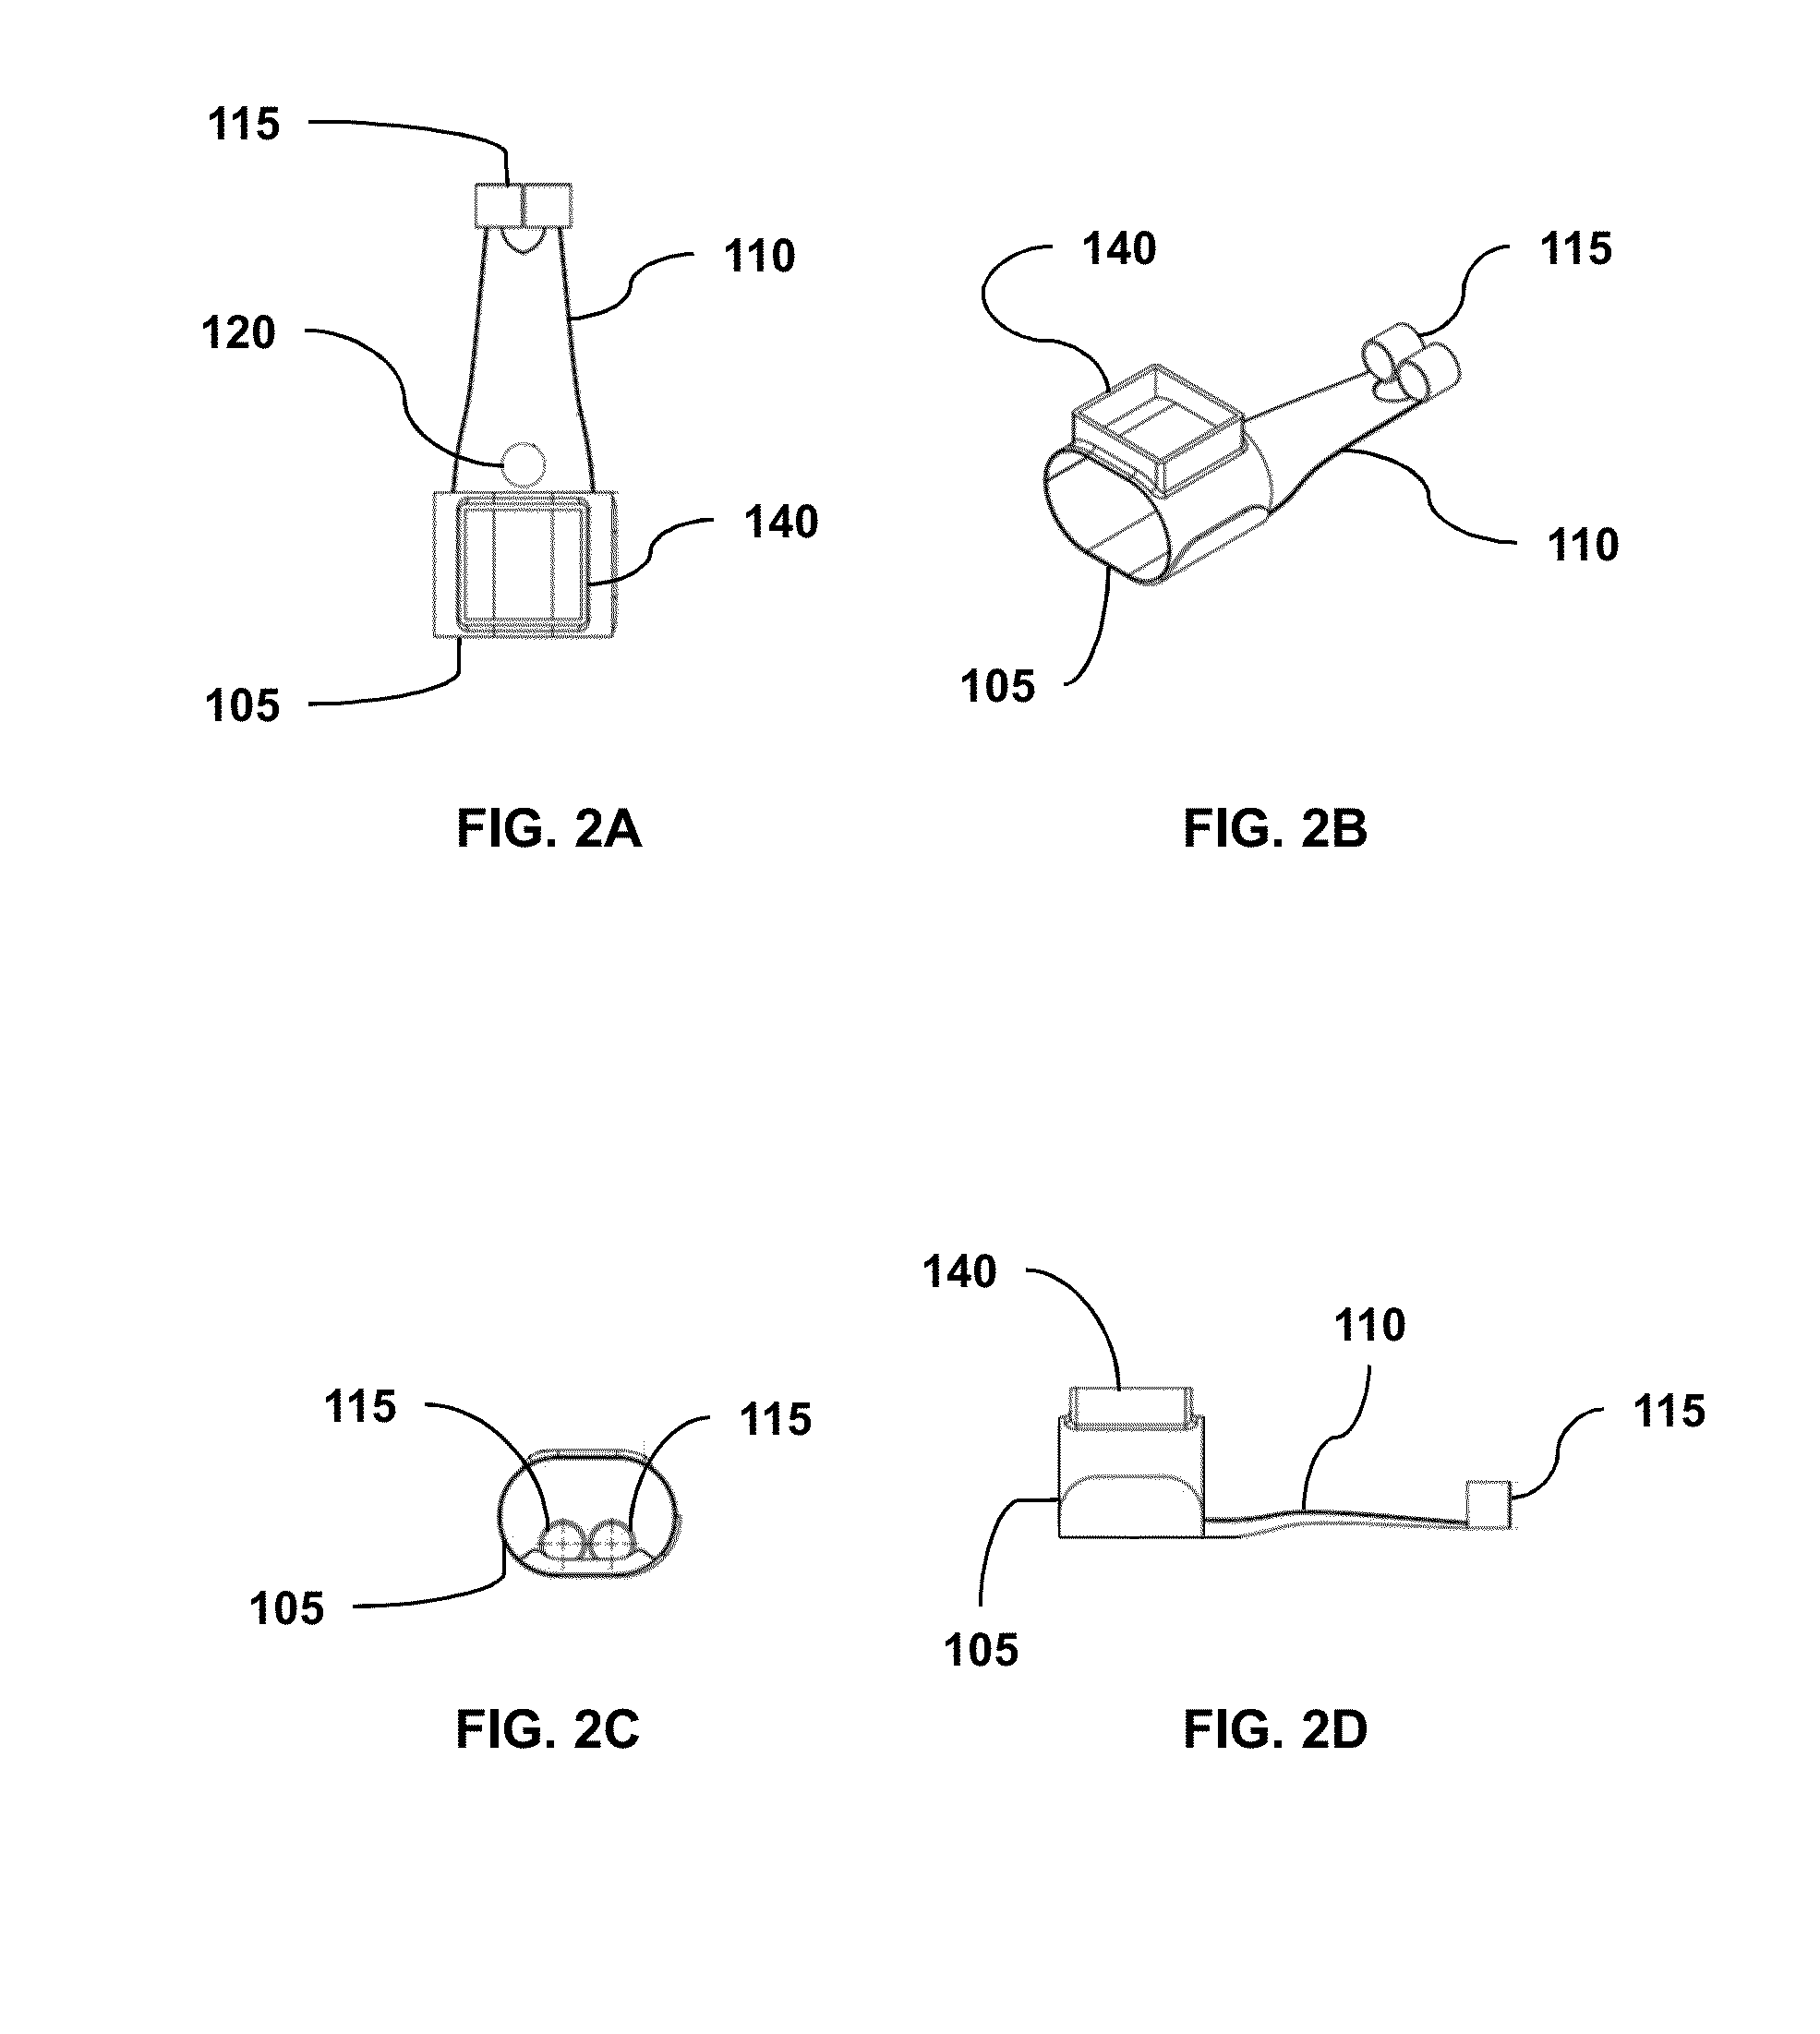 Pressure sensitive assemblies for limiting movements adverse to health or surgical recovery